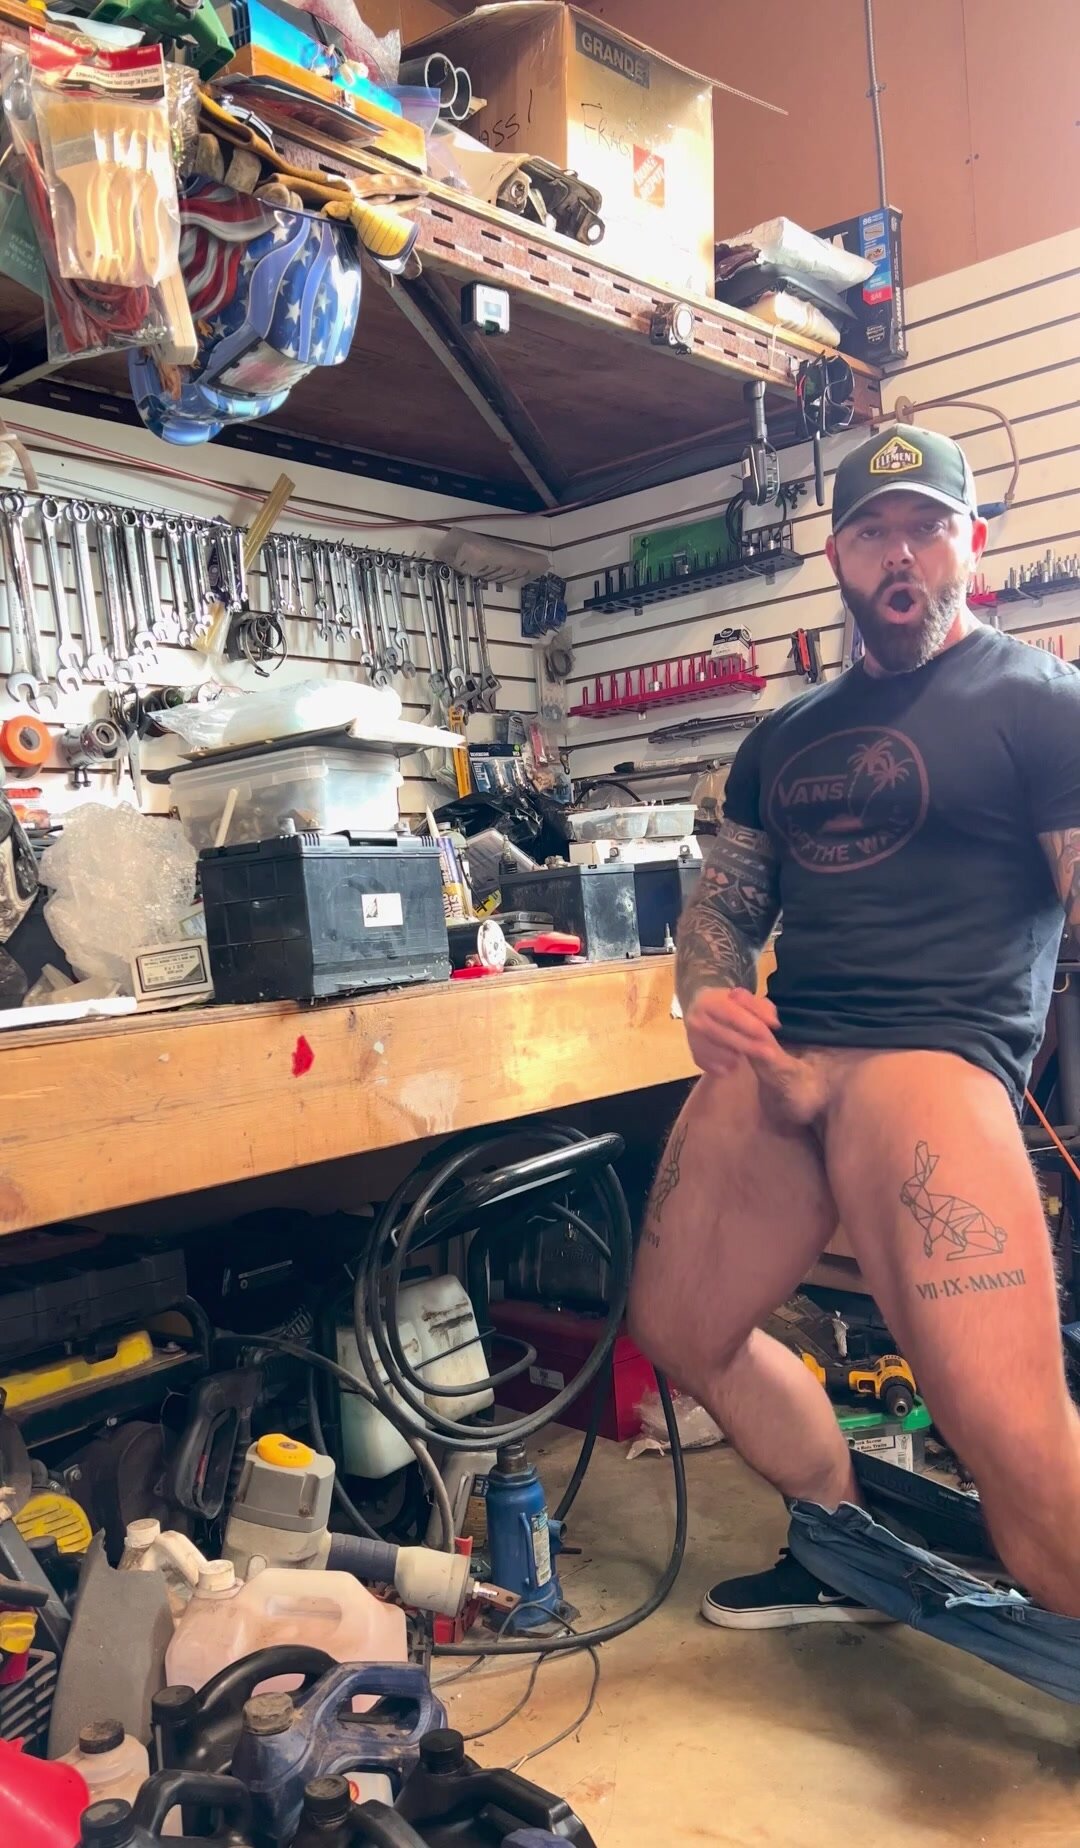 Horny Married Str8 Unloads A FAT One In Work Shed